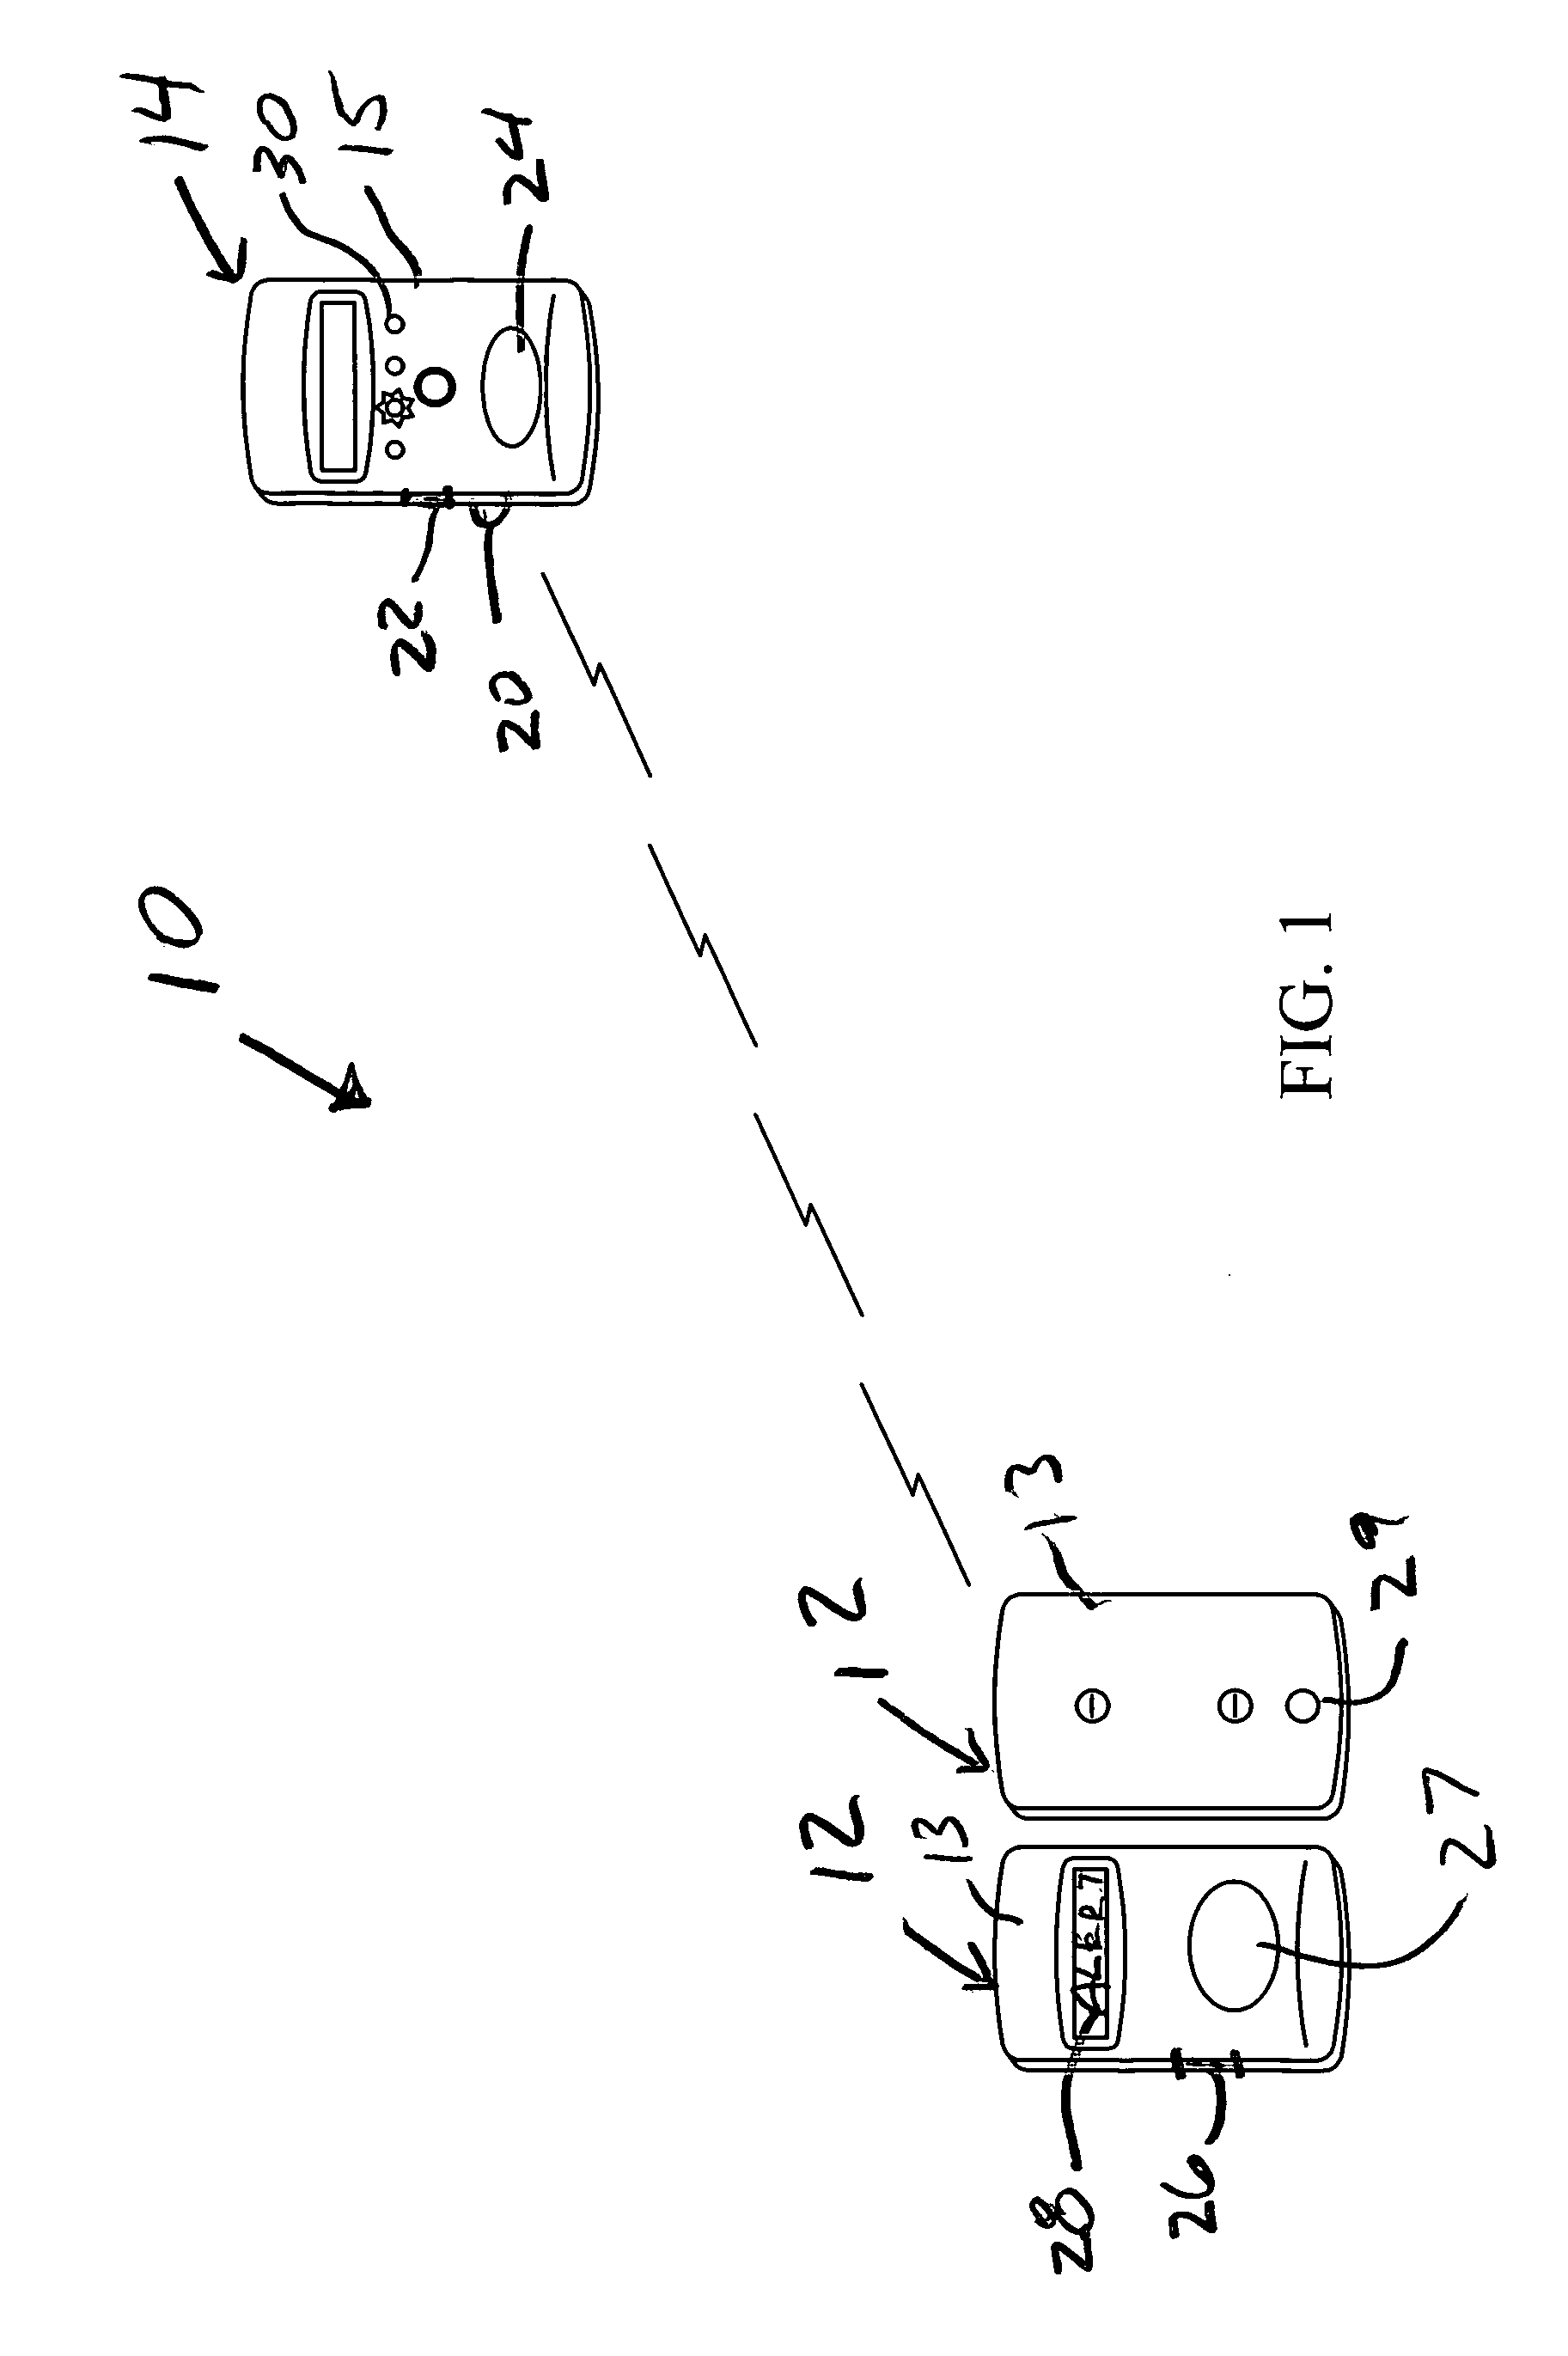 Person tracking and communication system